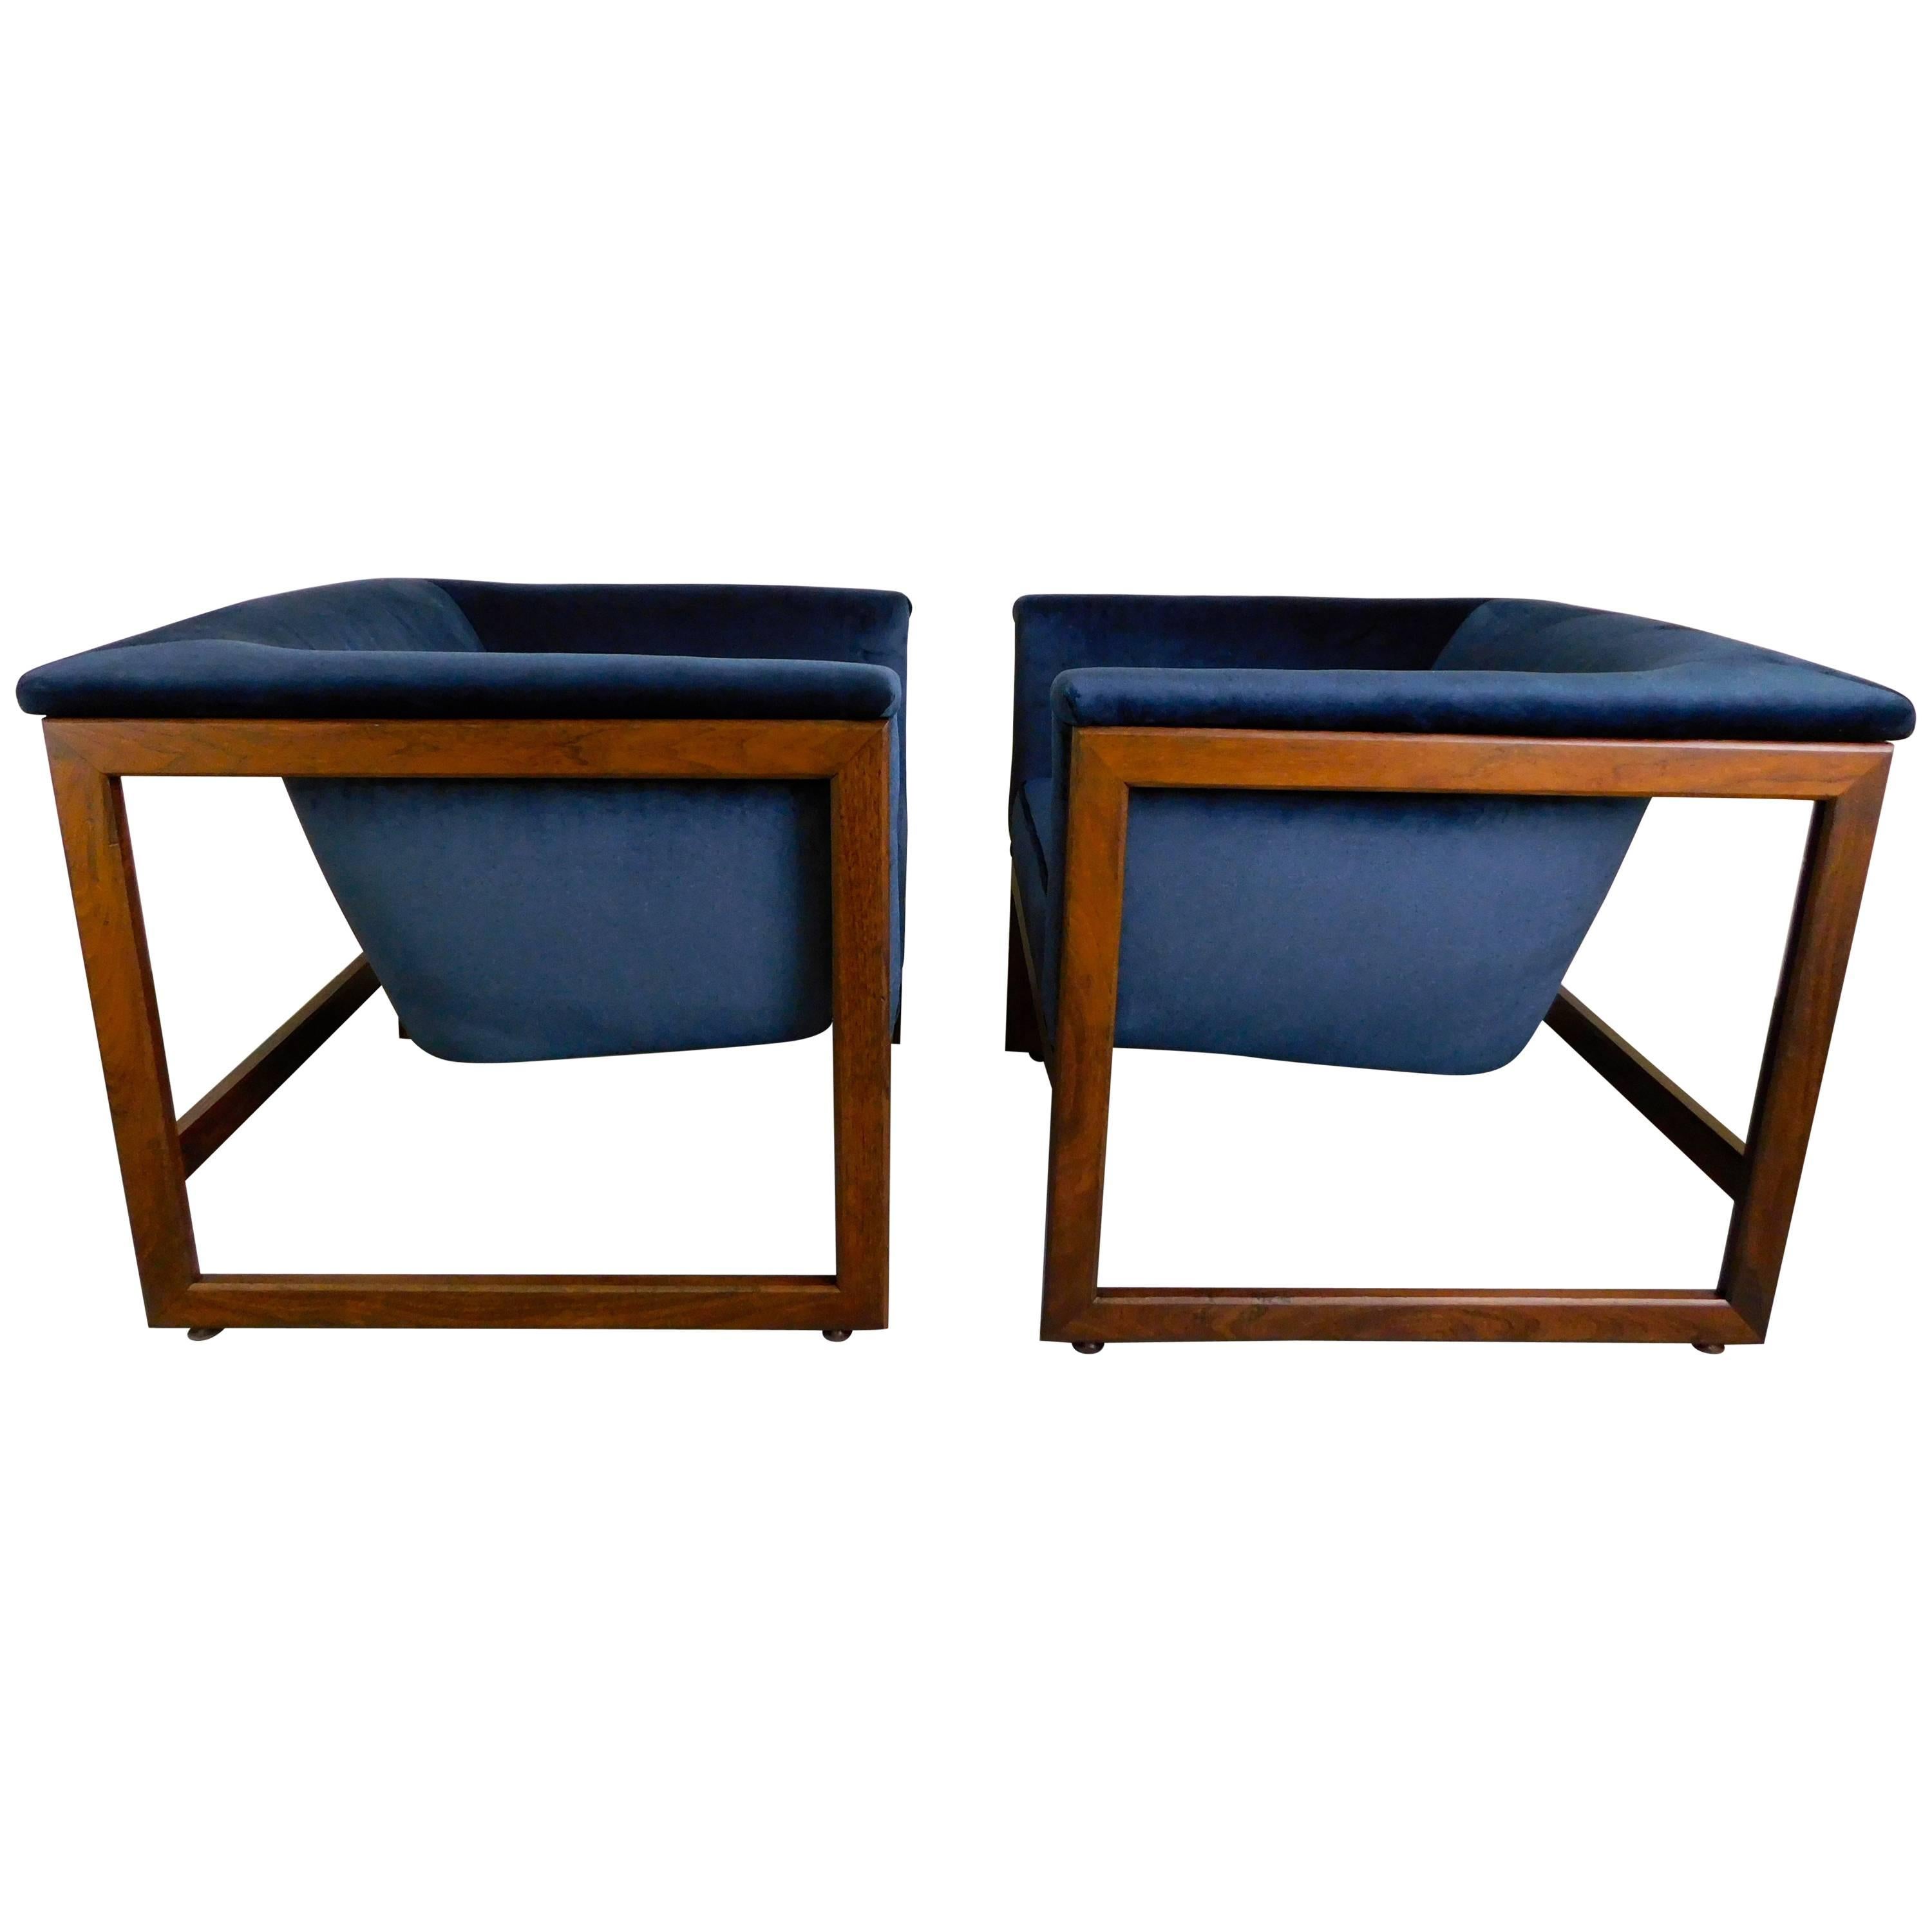 Pair of Floating Cube Chairs by Milo Baughman